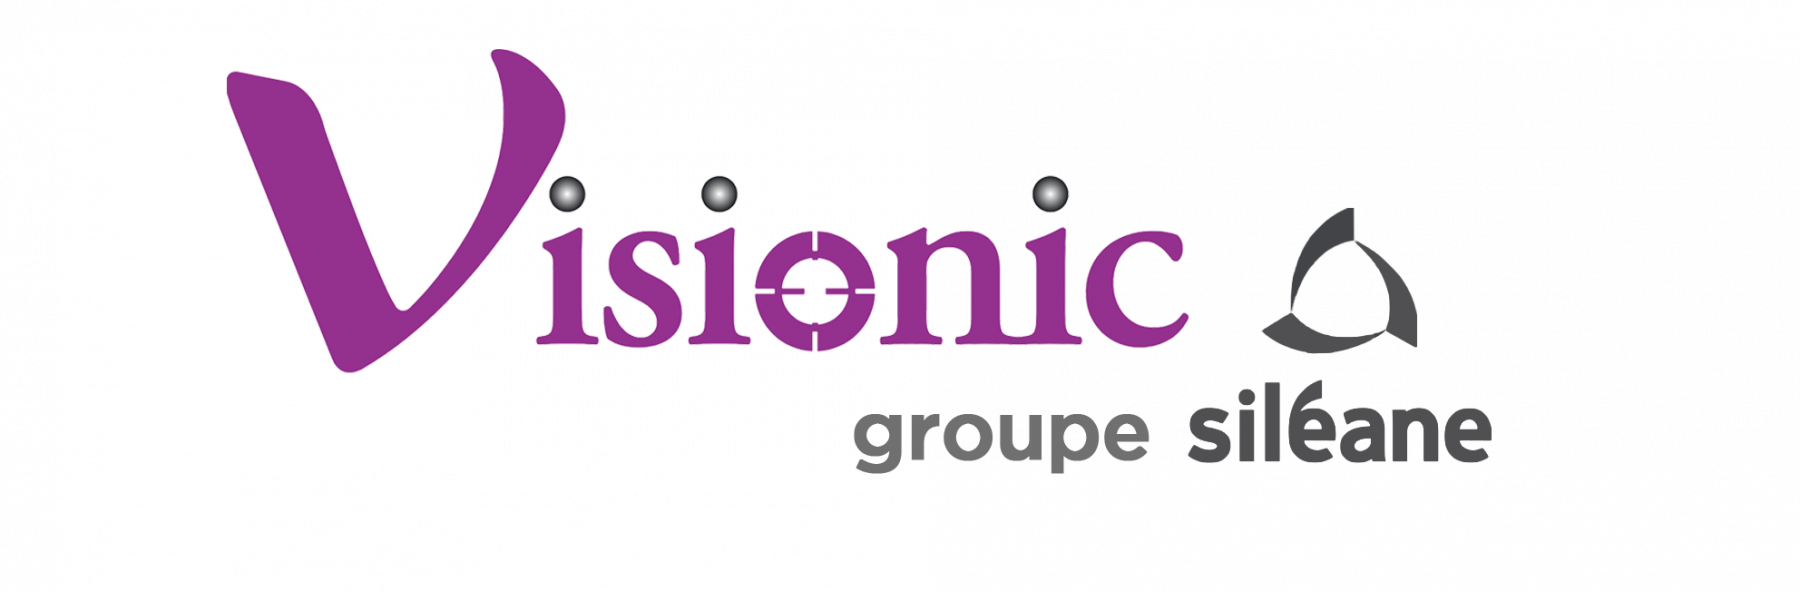 VISIONIC - Groupe SILEANE